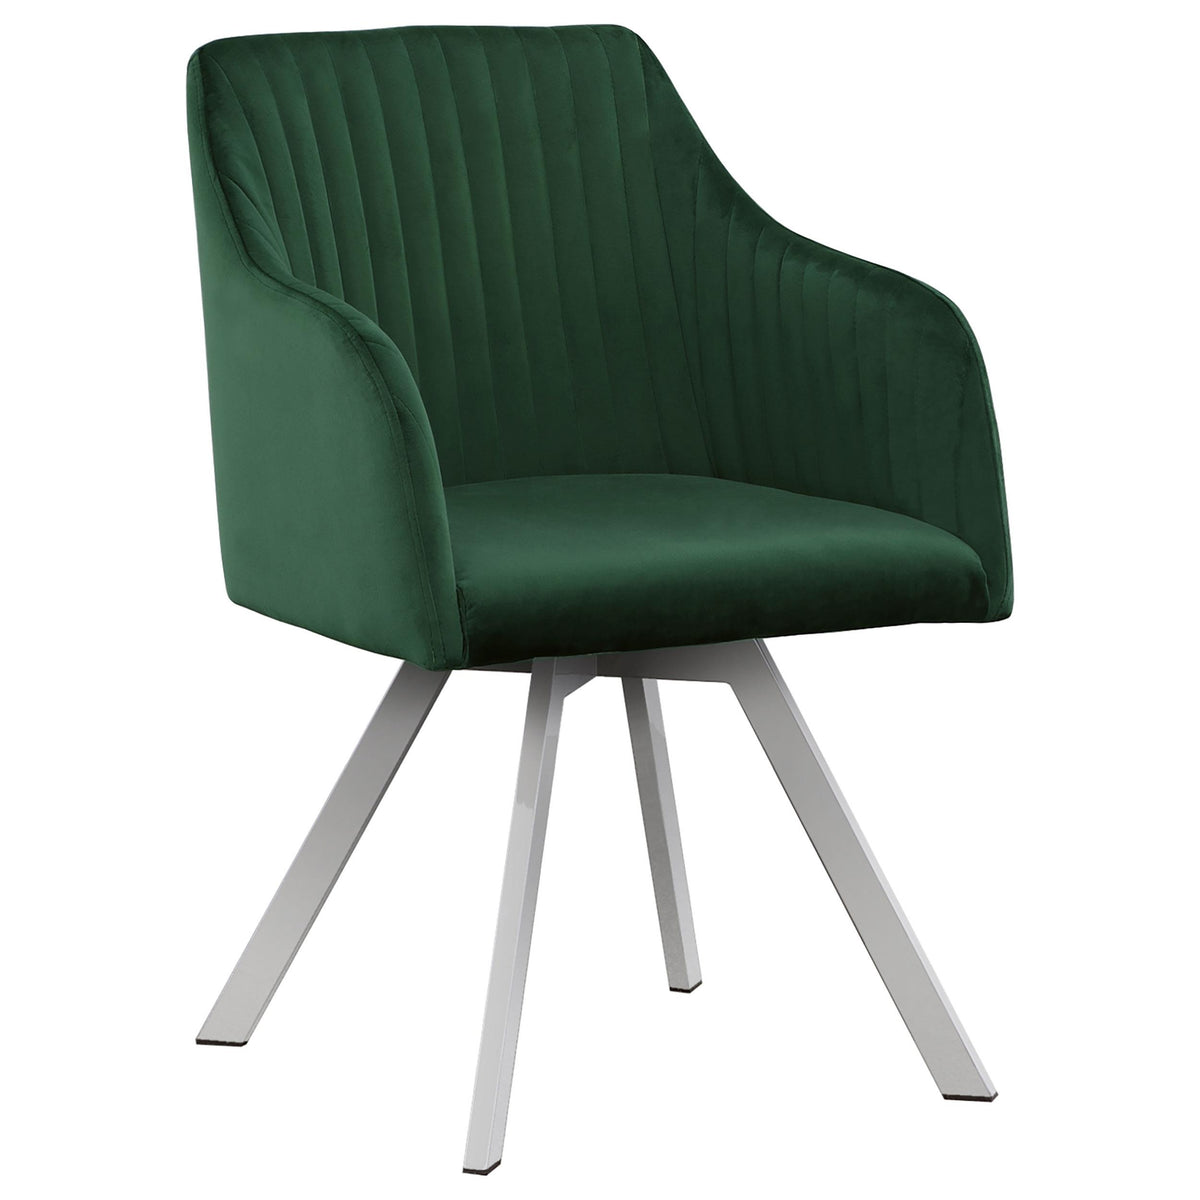 Arika Channeled Back Swivel Dining Chair Green Arika Channeled Back Swivel Dining Chair Green Half Price Furniture